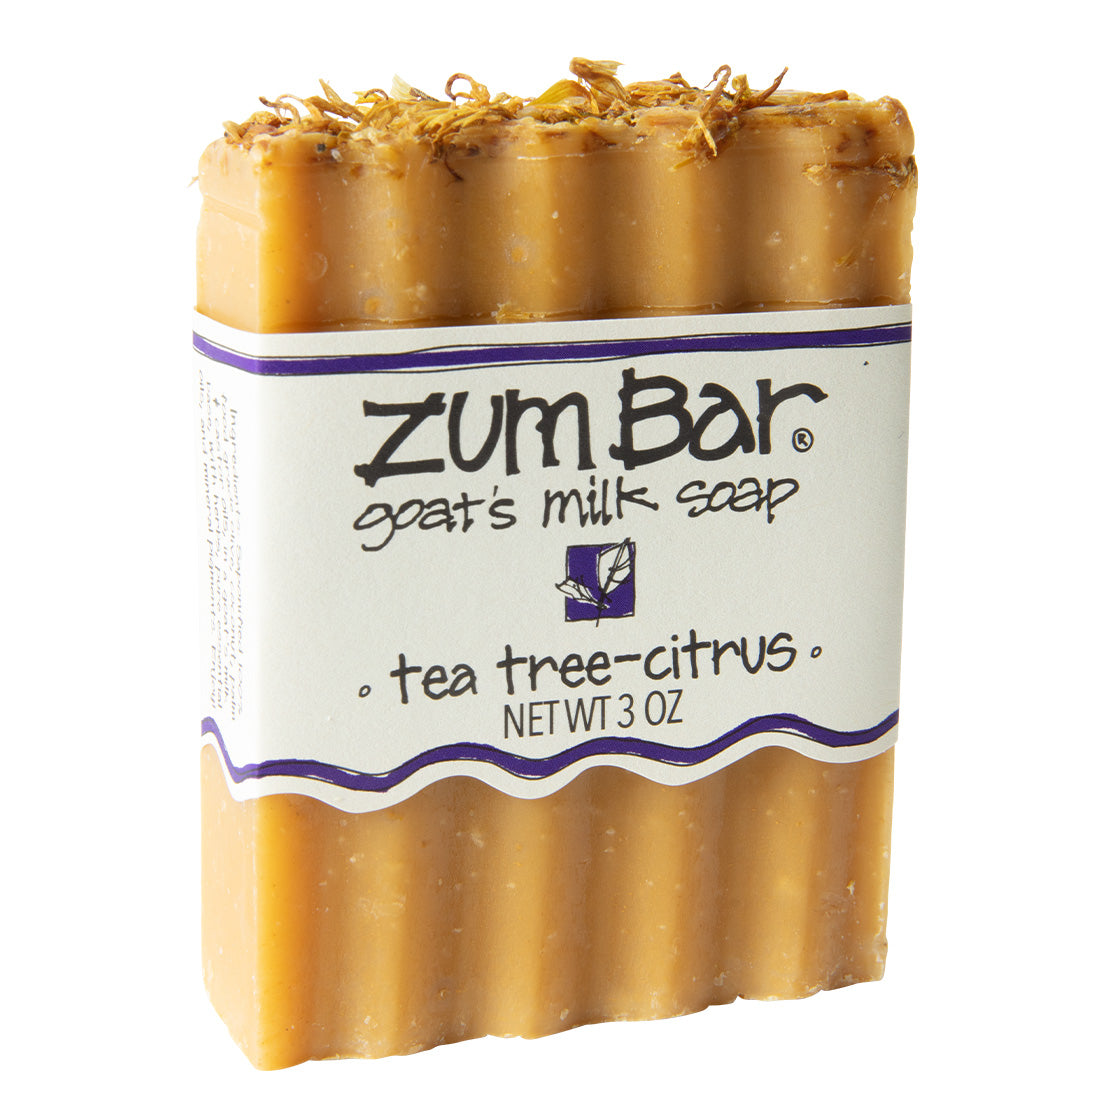 Labeled tea tree-citrus scented Zum Bar Soap with yellow coloring